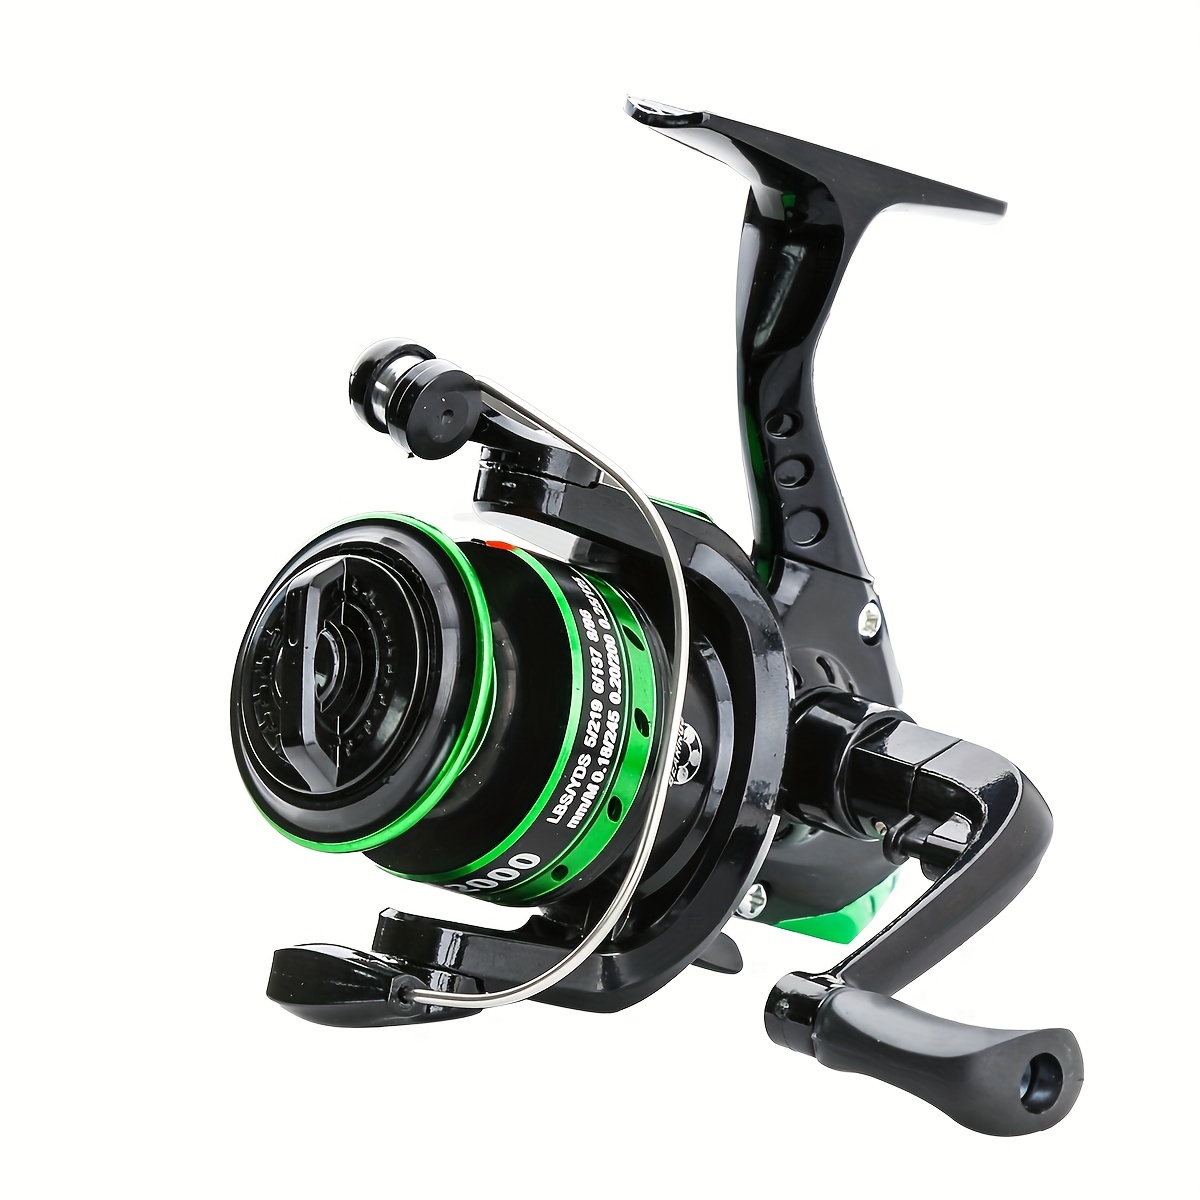 

1pc Spinning Fishing Reel, 5.2:1 Gear Ratio, Plastic Reel For Casting Fly Fishing Trolling